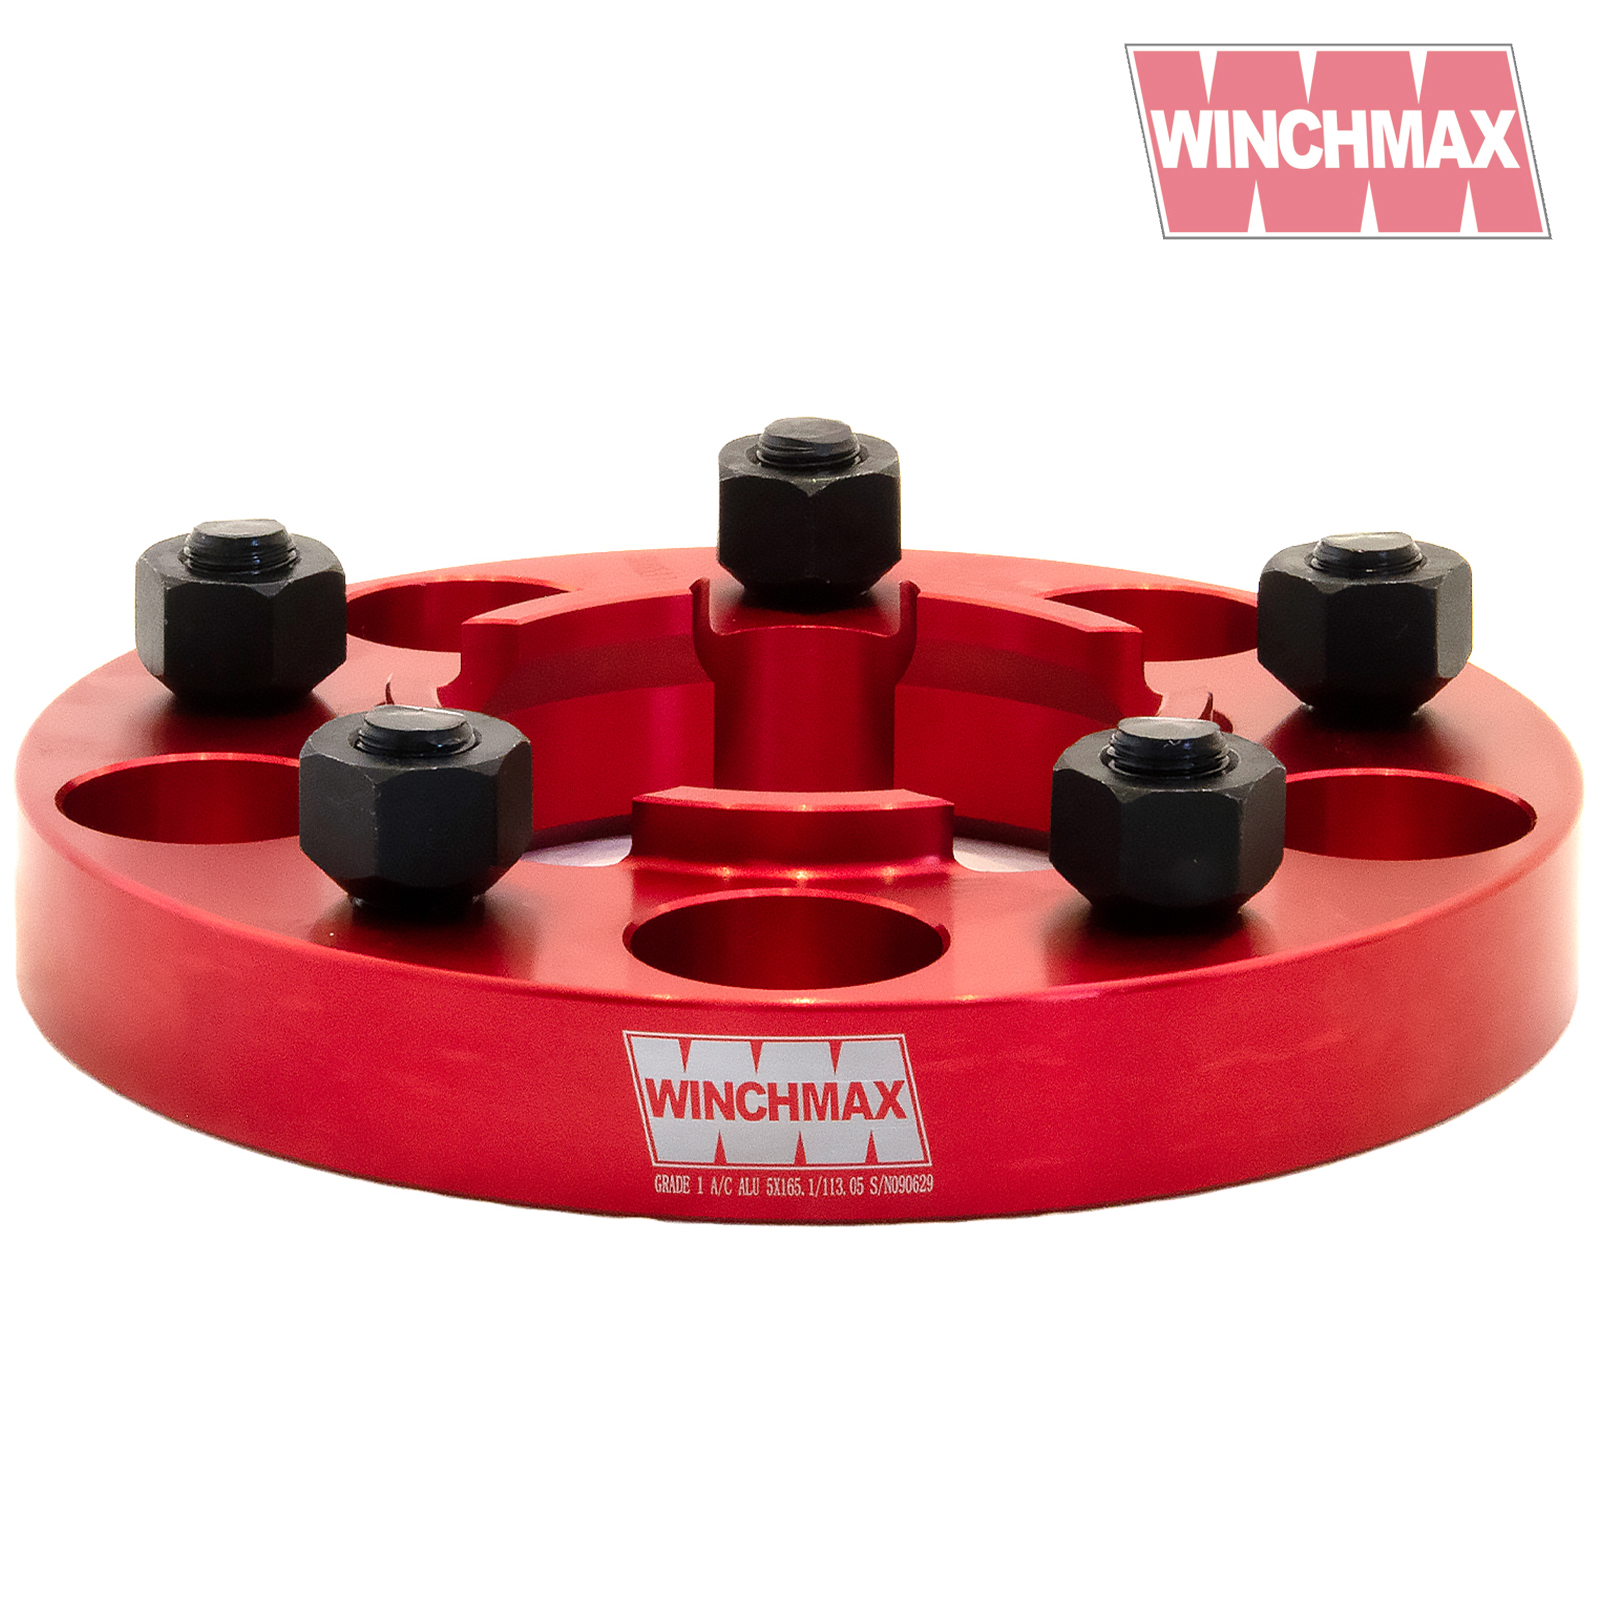 WINCHMAX 30mm Wheel Spacer T1